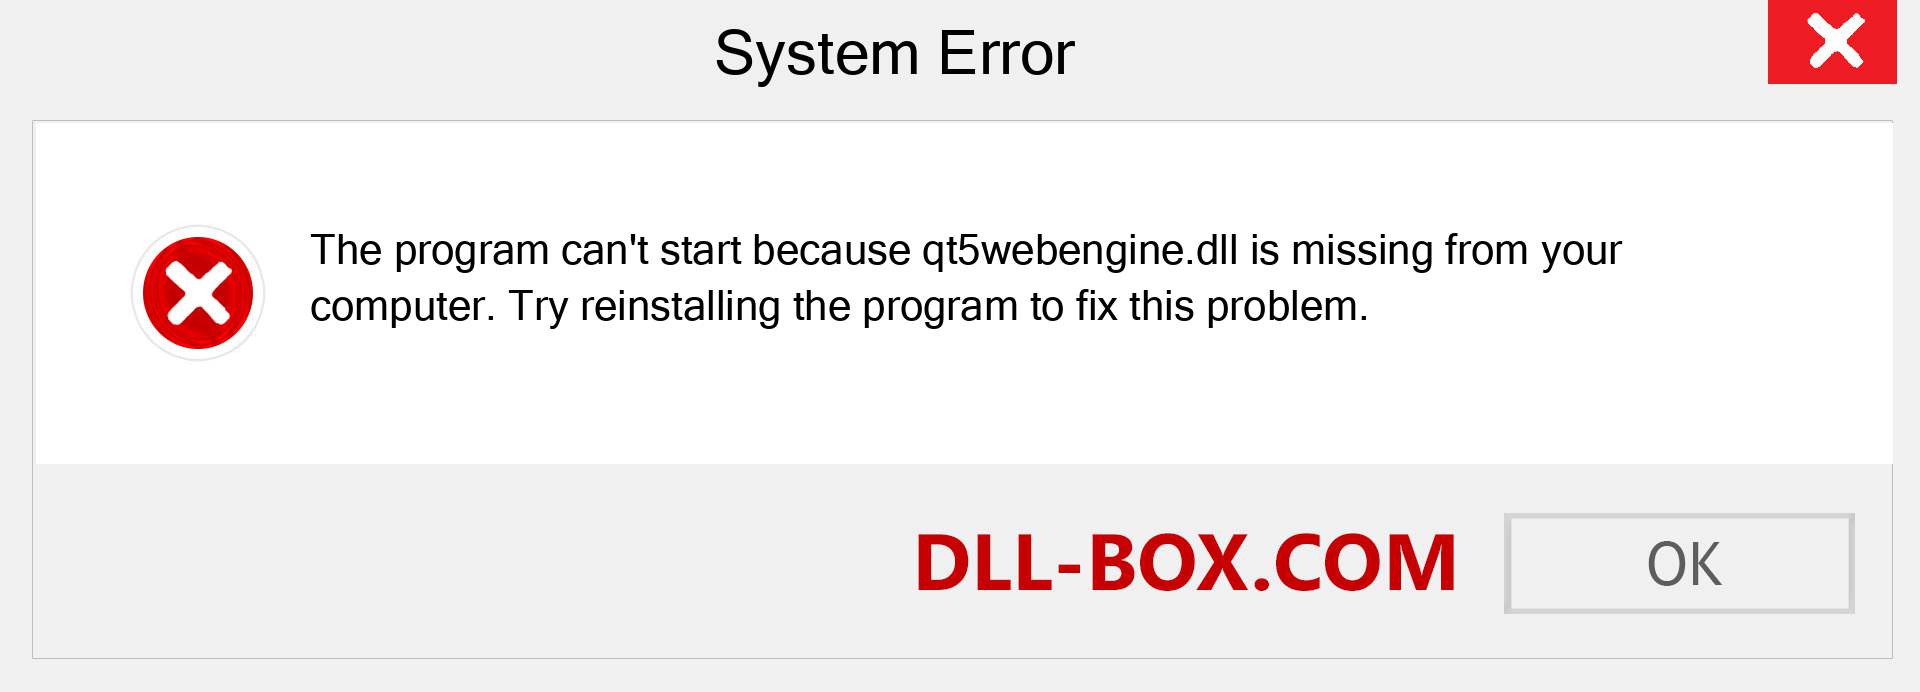  qt5webengine.dll file is missing?. Download for Windows 7, 8, 10 - Fix  qt5webengine dll Missing Error on Windows, photos, images